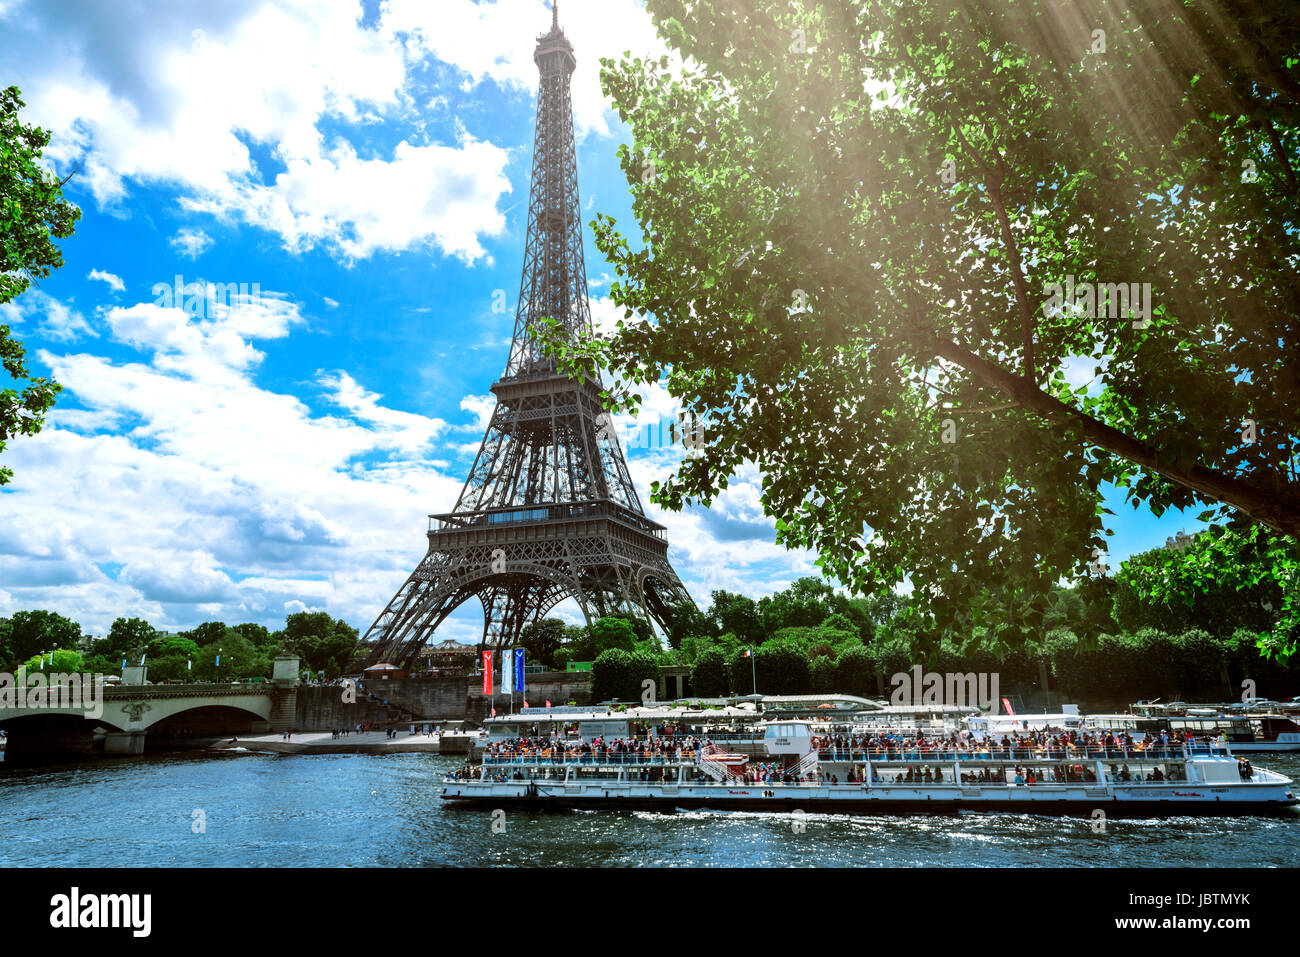 Paris, France, June 06, 2017 : Paris, the beautiful view of the Eiffel Tower on a summer day Stock Photo